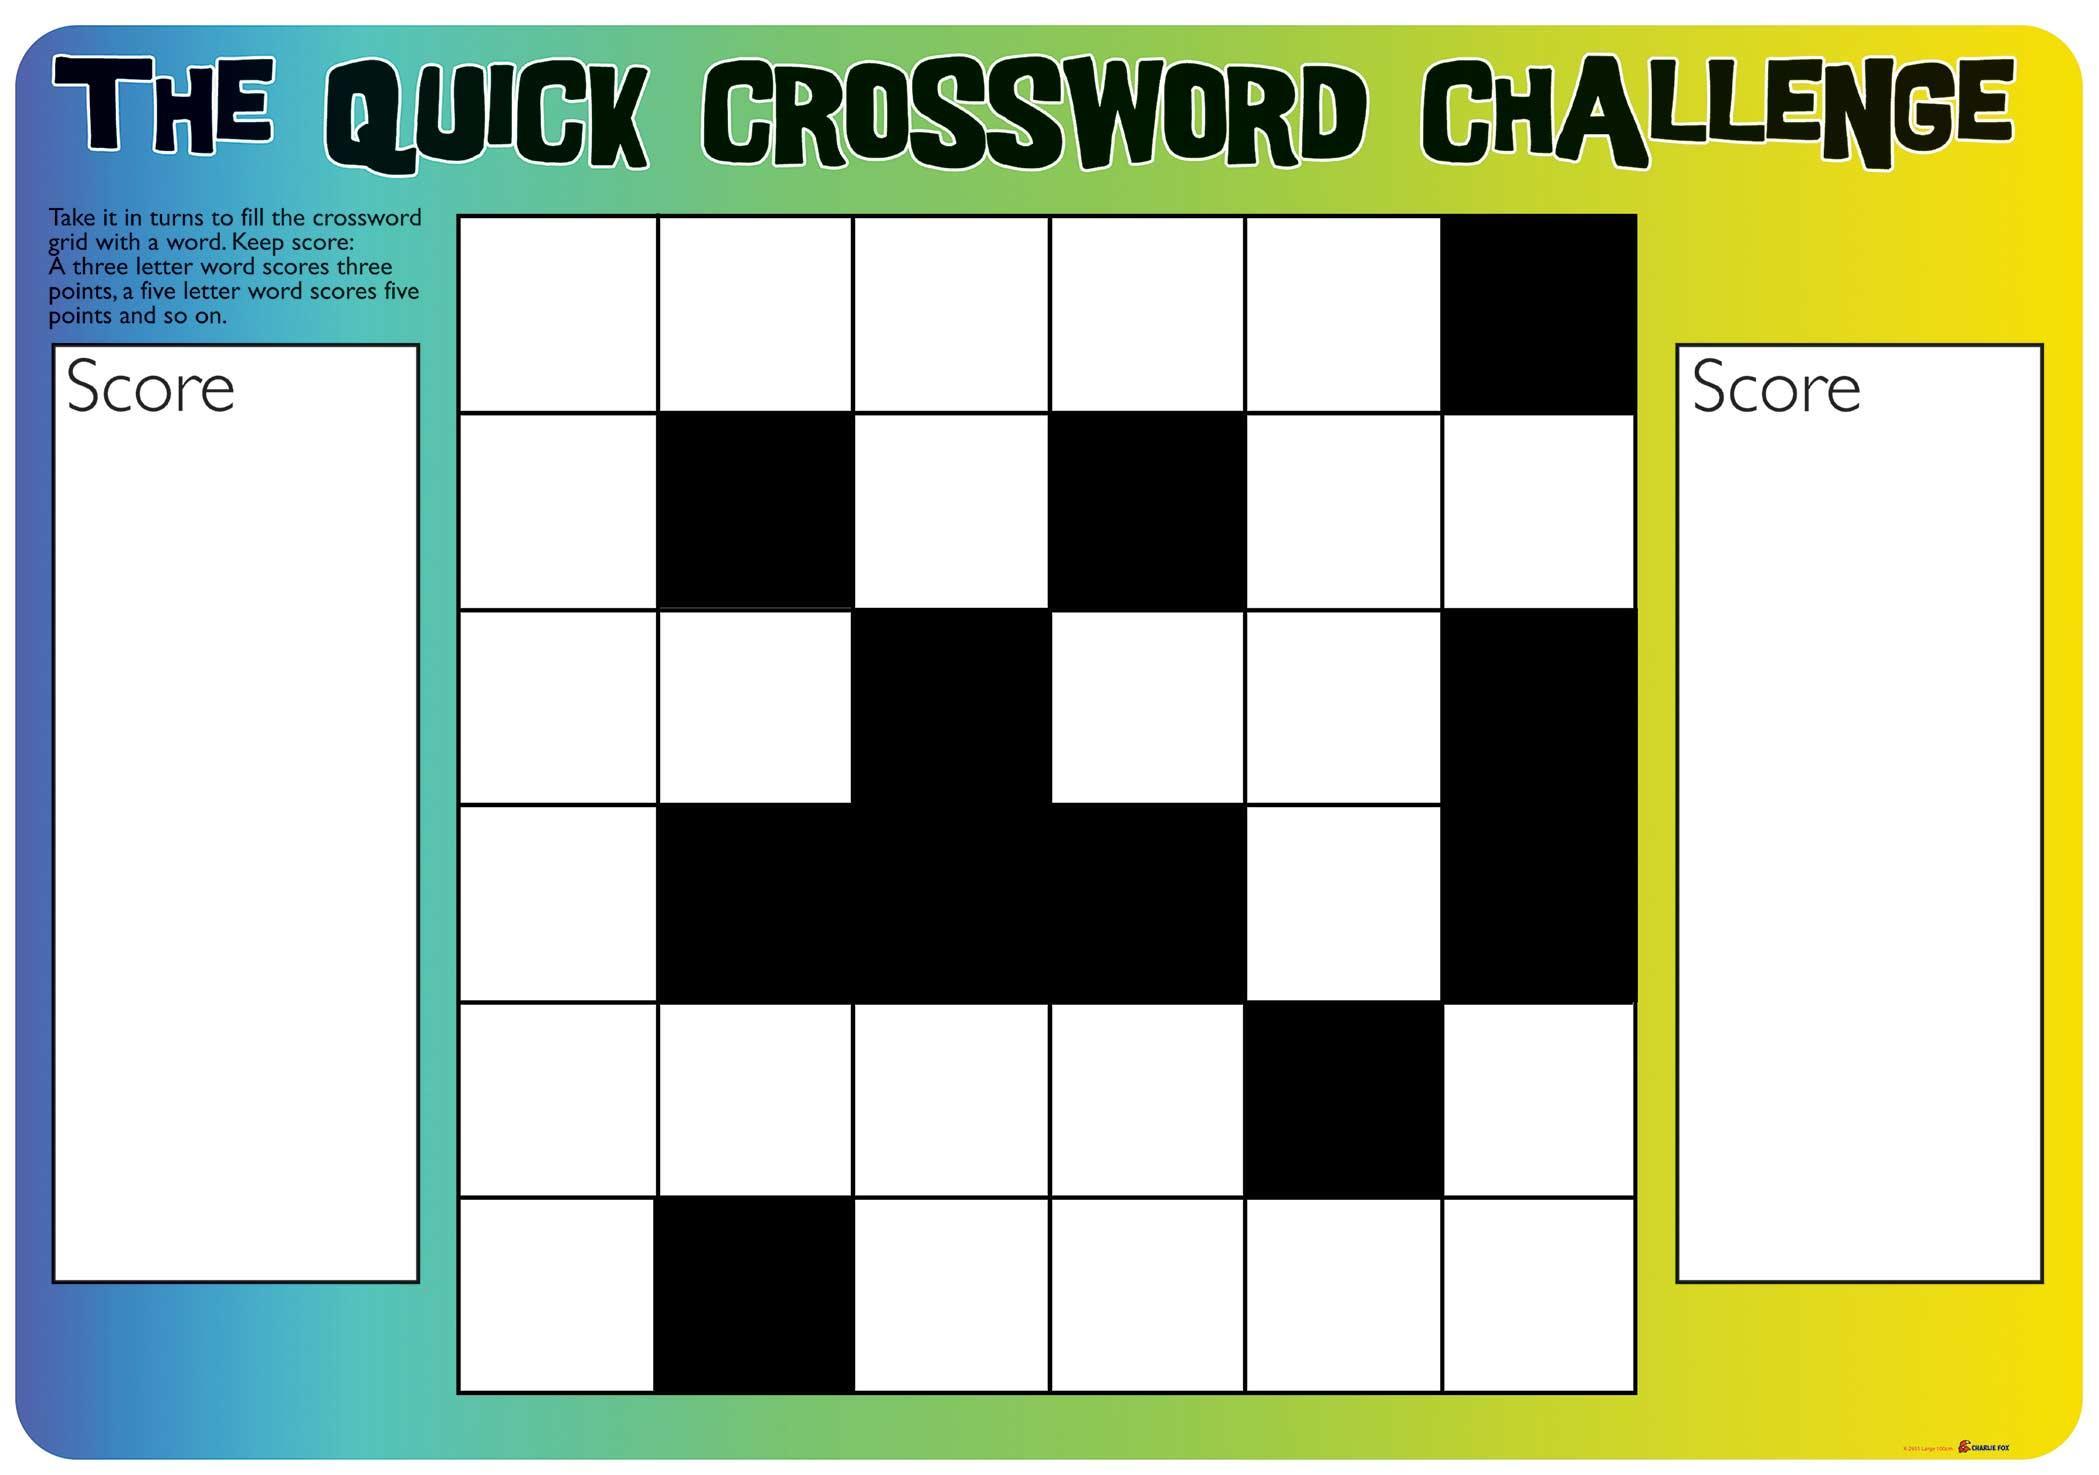 game-quest-crossword-clue-answer-crossword-key-history-computing-games